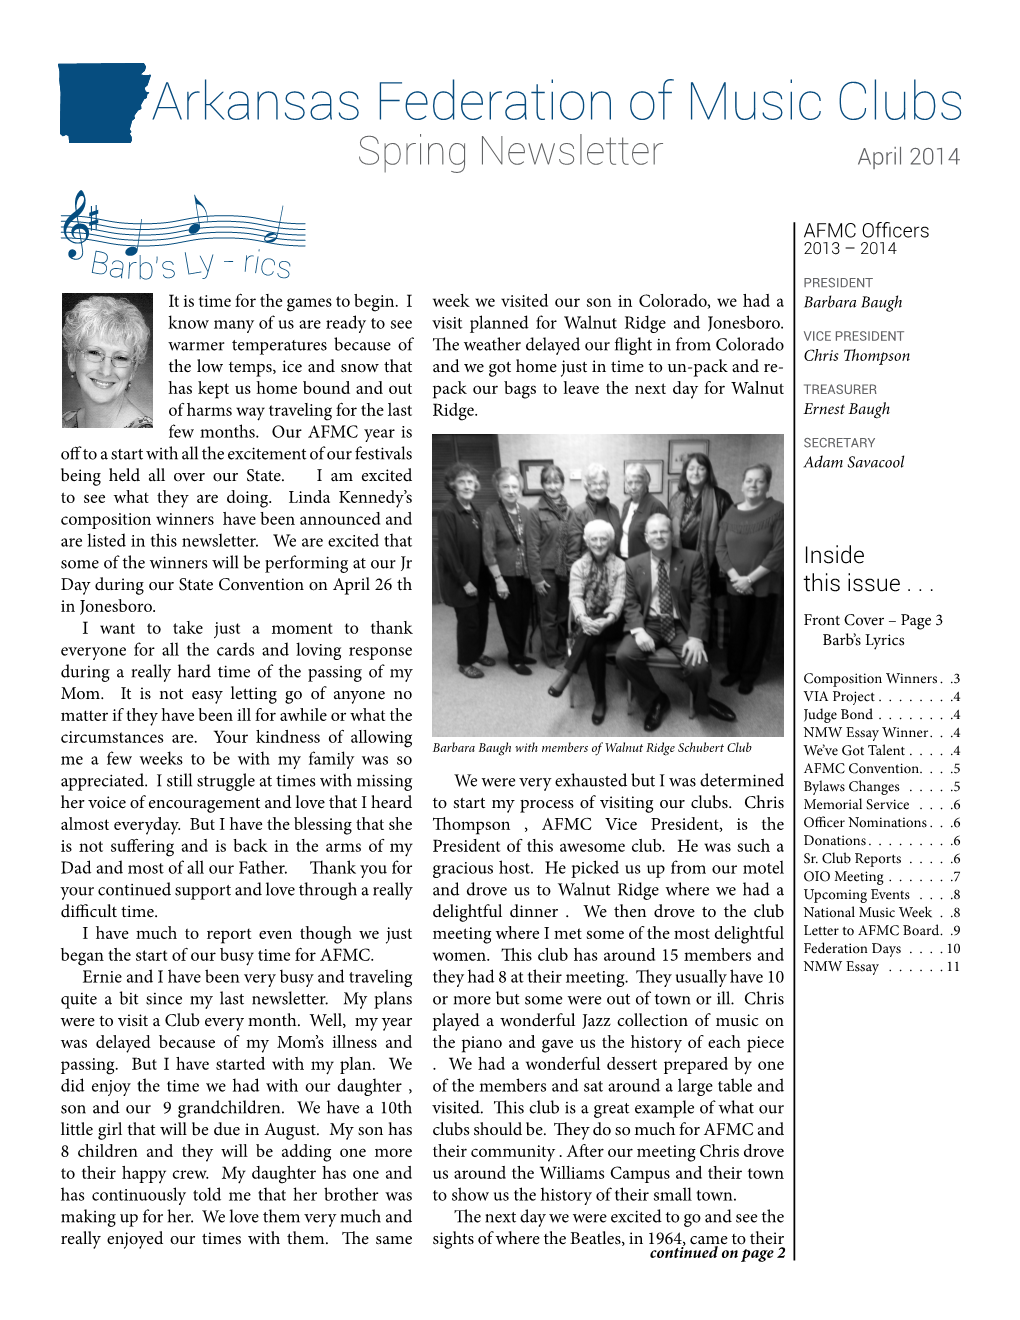 Arkansas Federation of Music Clubs Spring Newsletter April 2014